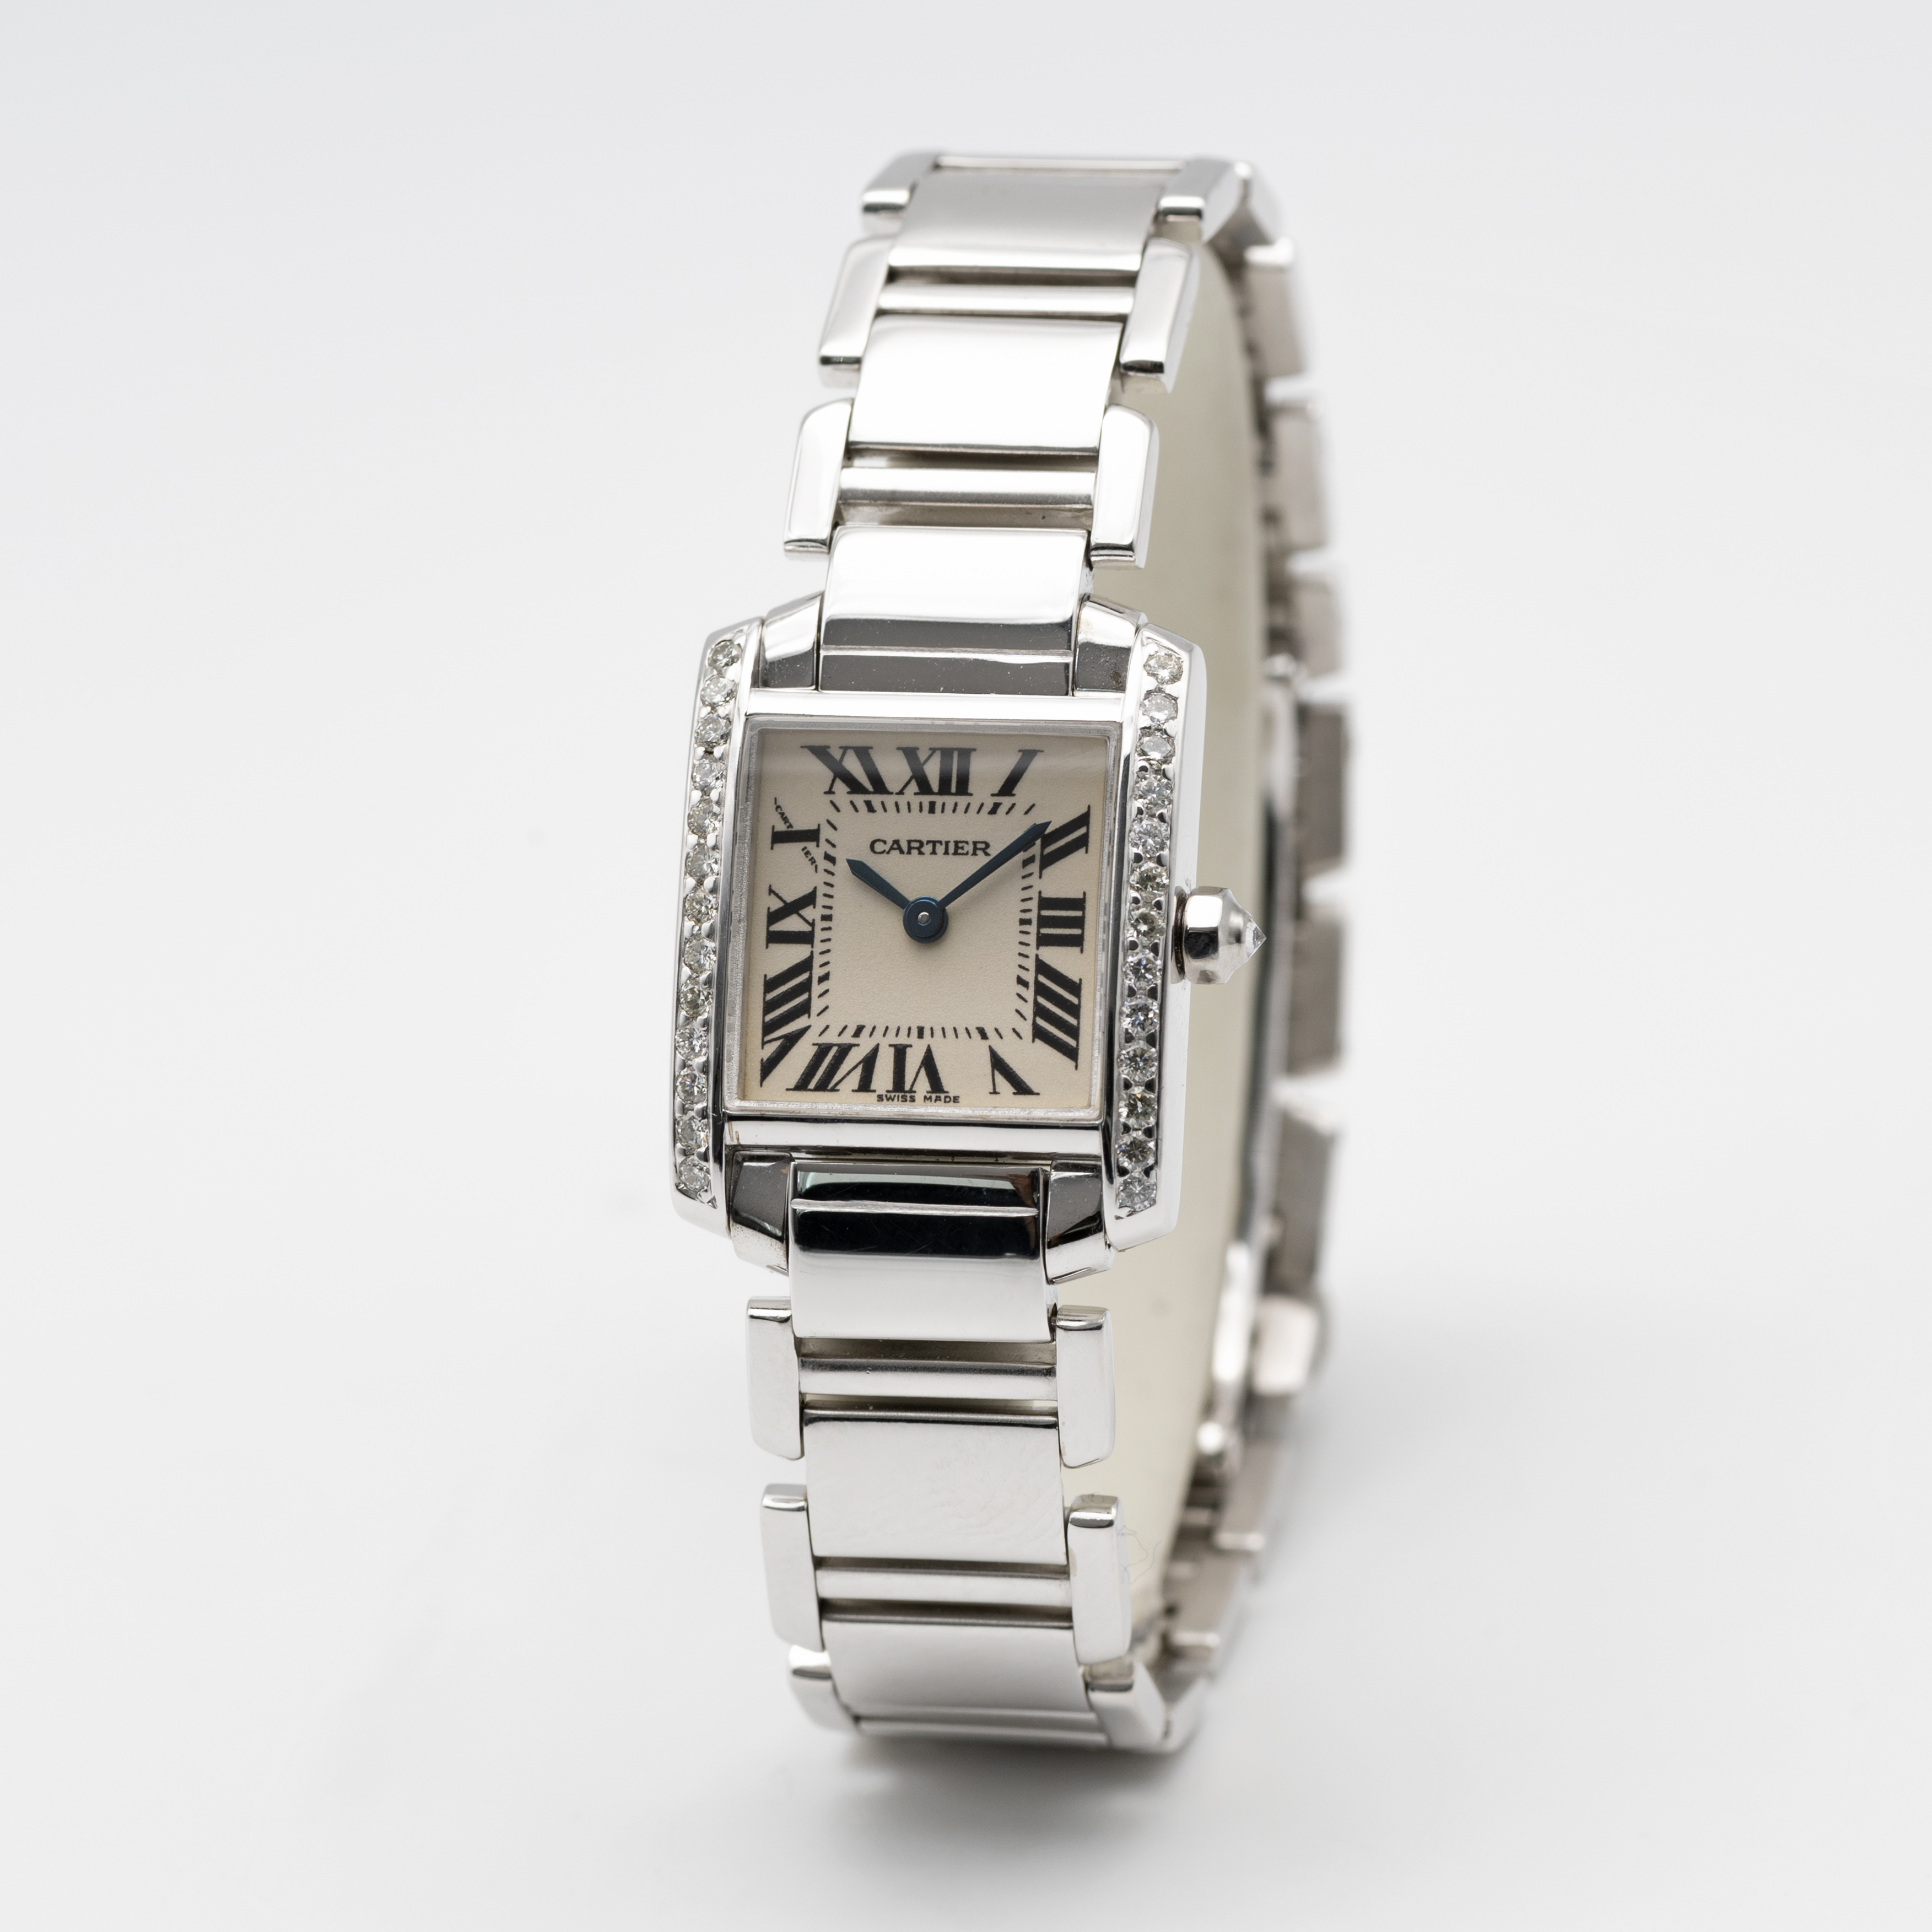 A LADIES 18K SOLID WHITE GOLD CARTIER TANK FRANCAISE BRACELET WATCH CIRCA 2005, REF. 2403 WITH AFTER - Image 3 of 9